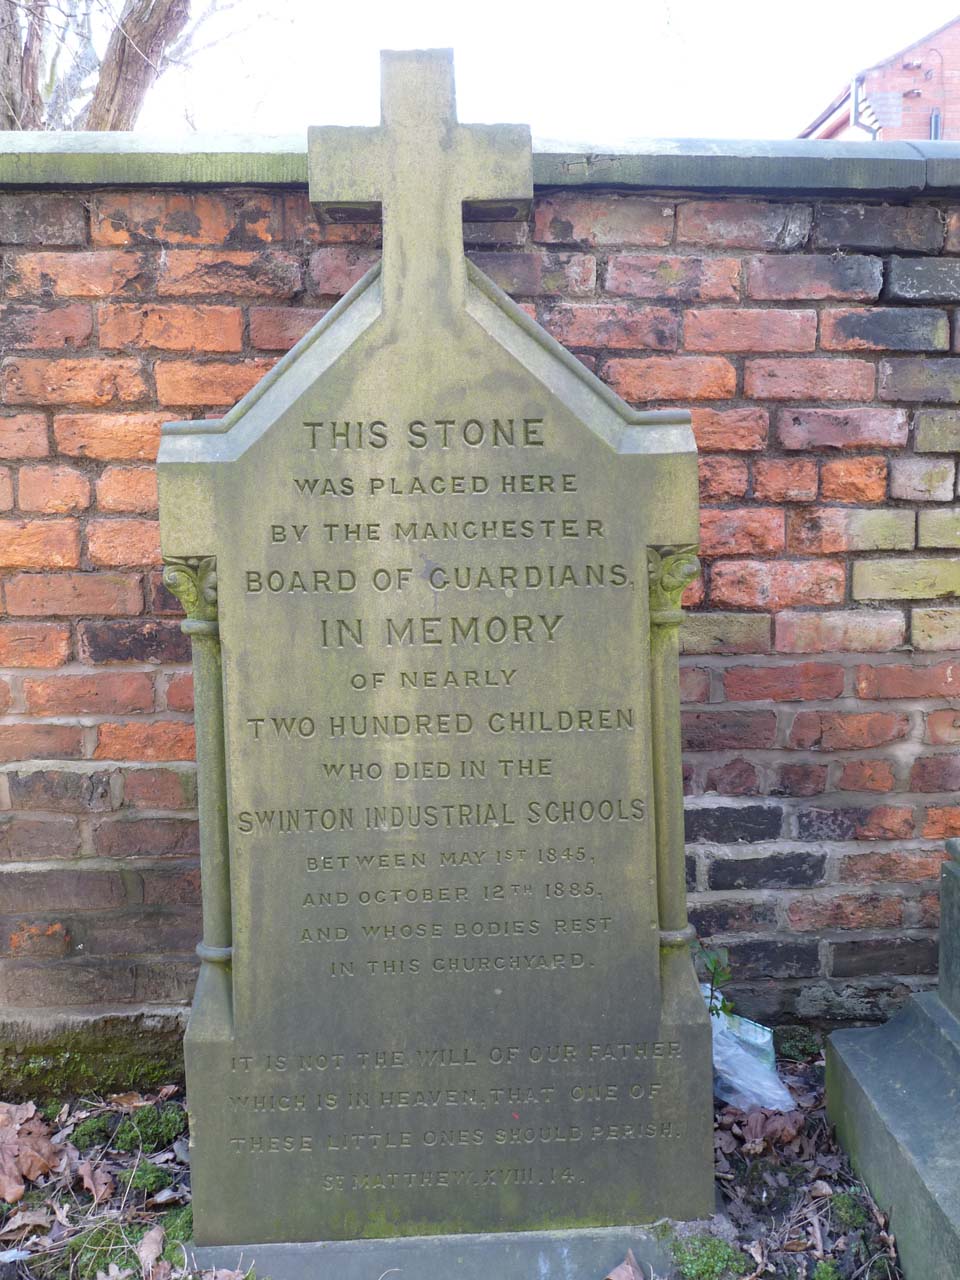 A Monument to the poor children at the Swinton Industrial Schools